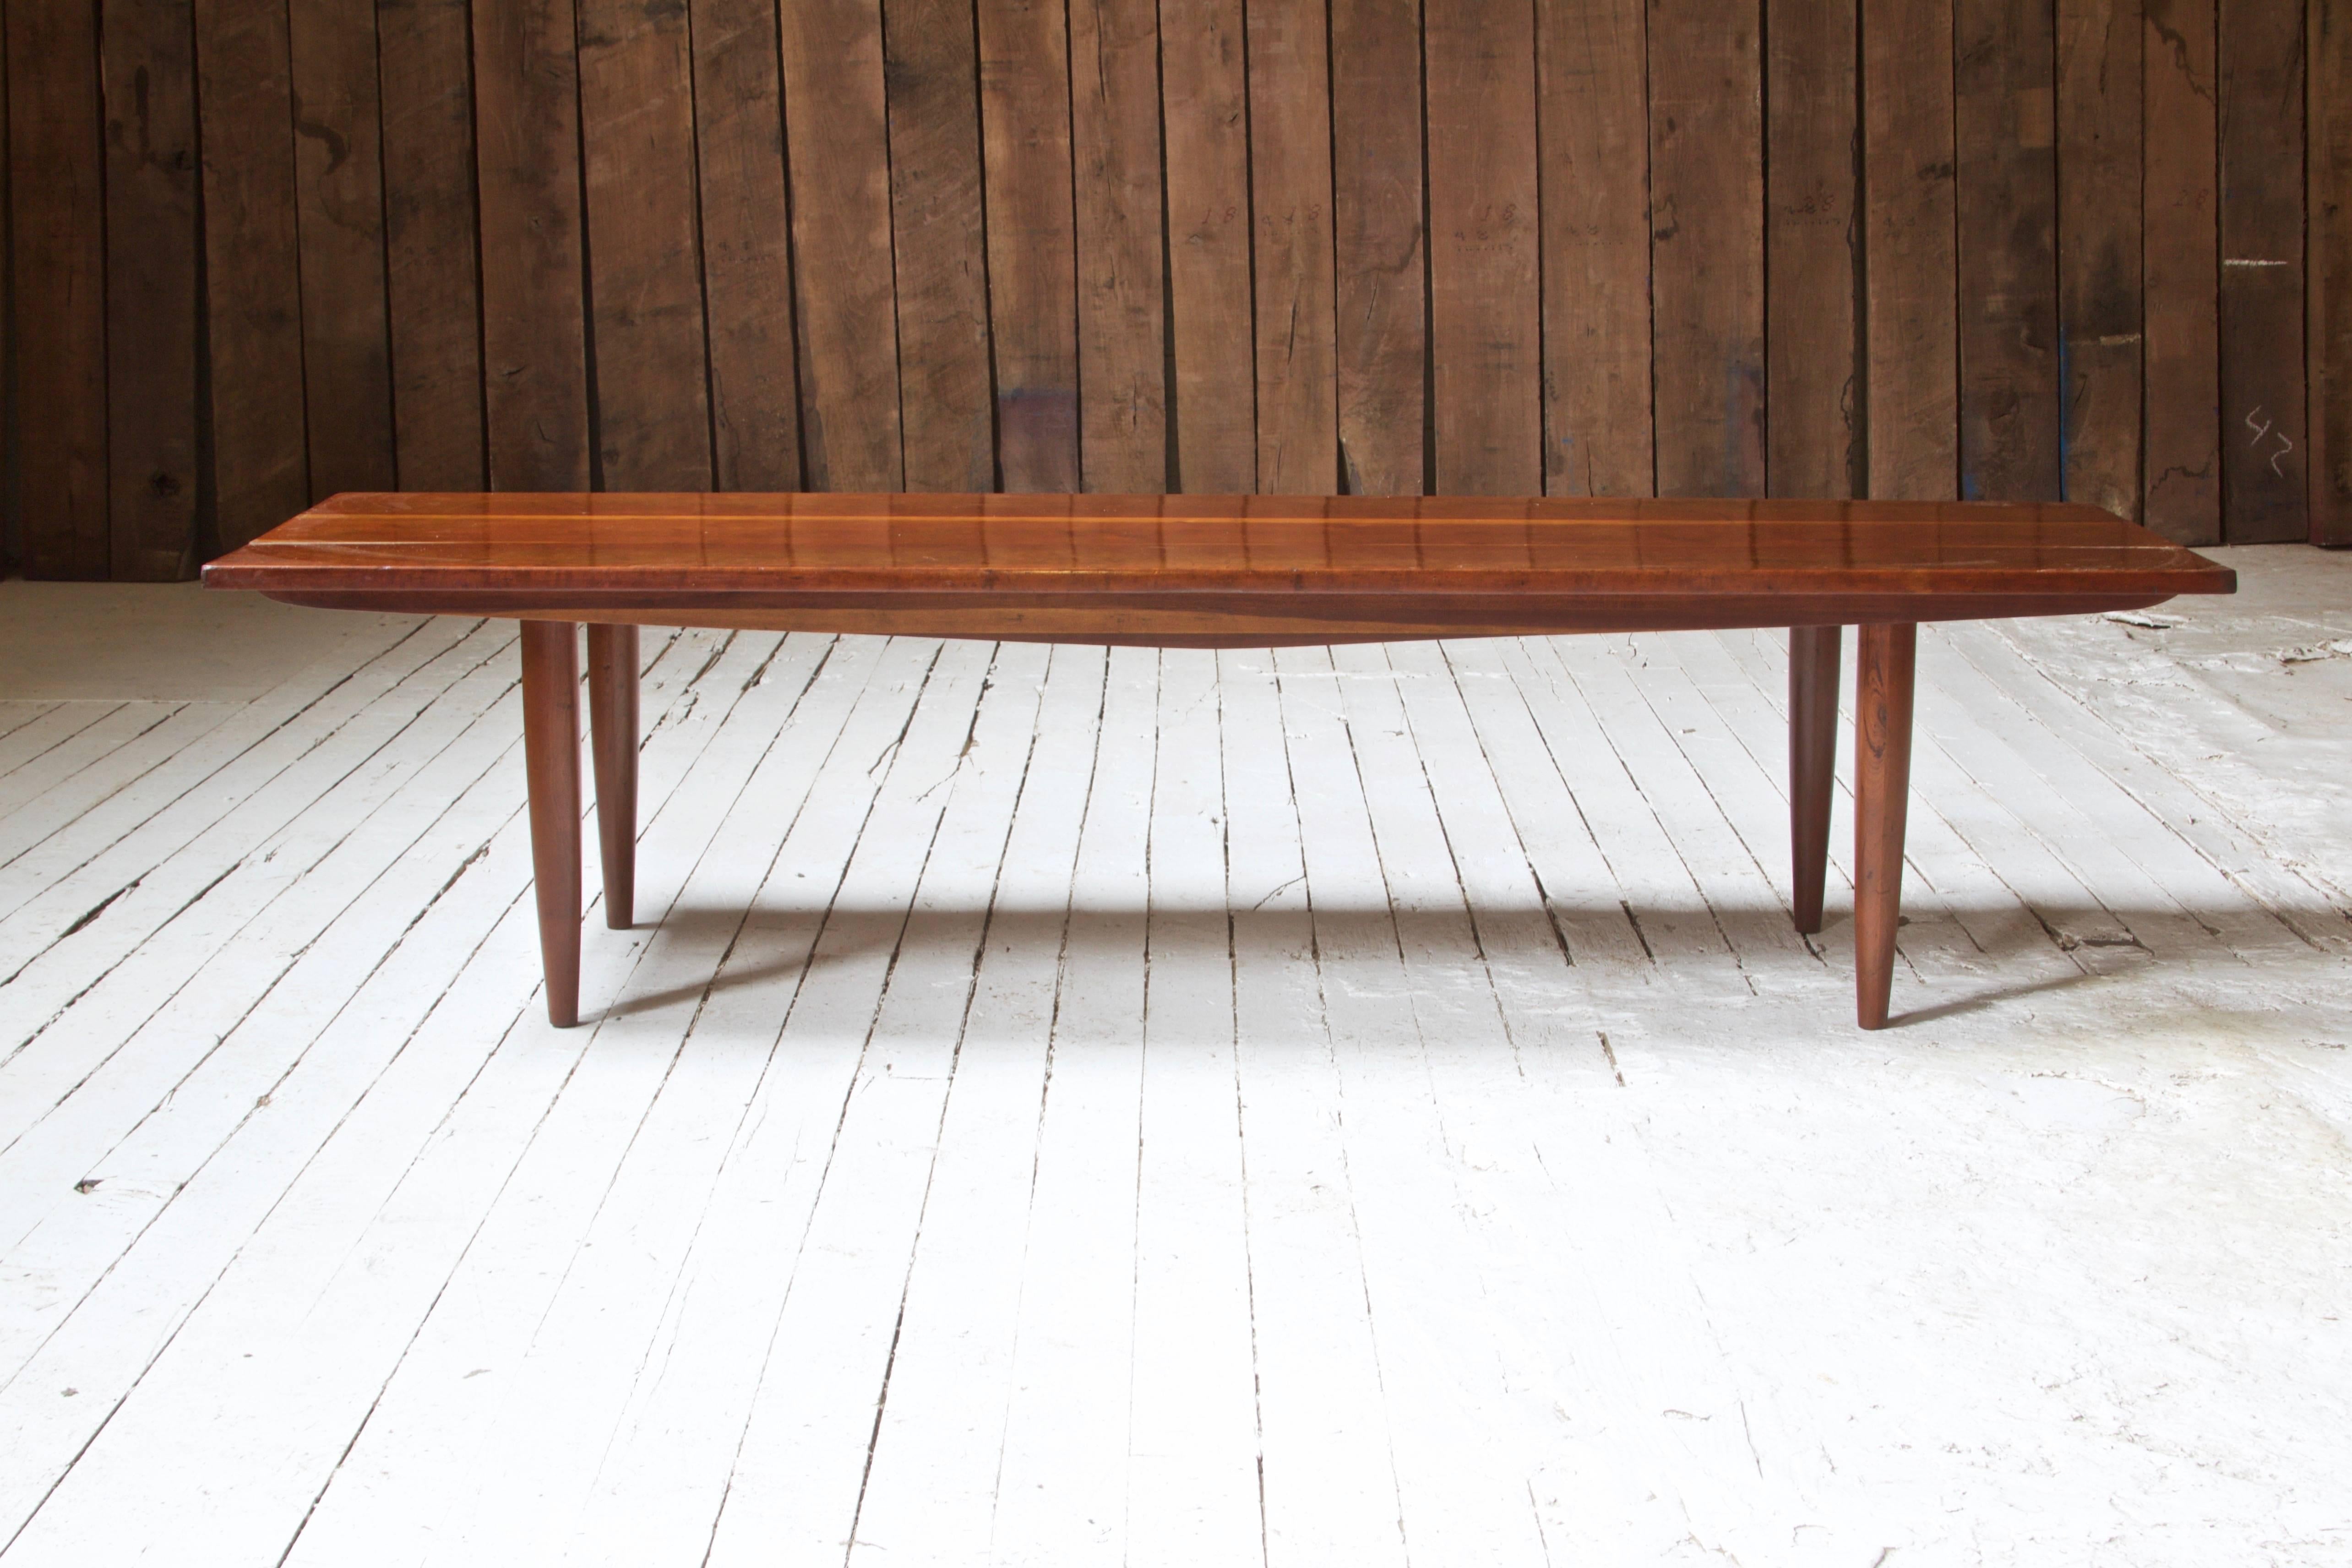 American Craftsman Vintage Studio Movement Coffee Table by Phillip Lloyd Powell in Cherry, 1960s For Sale